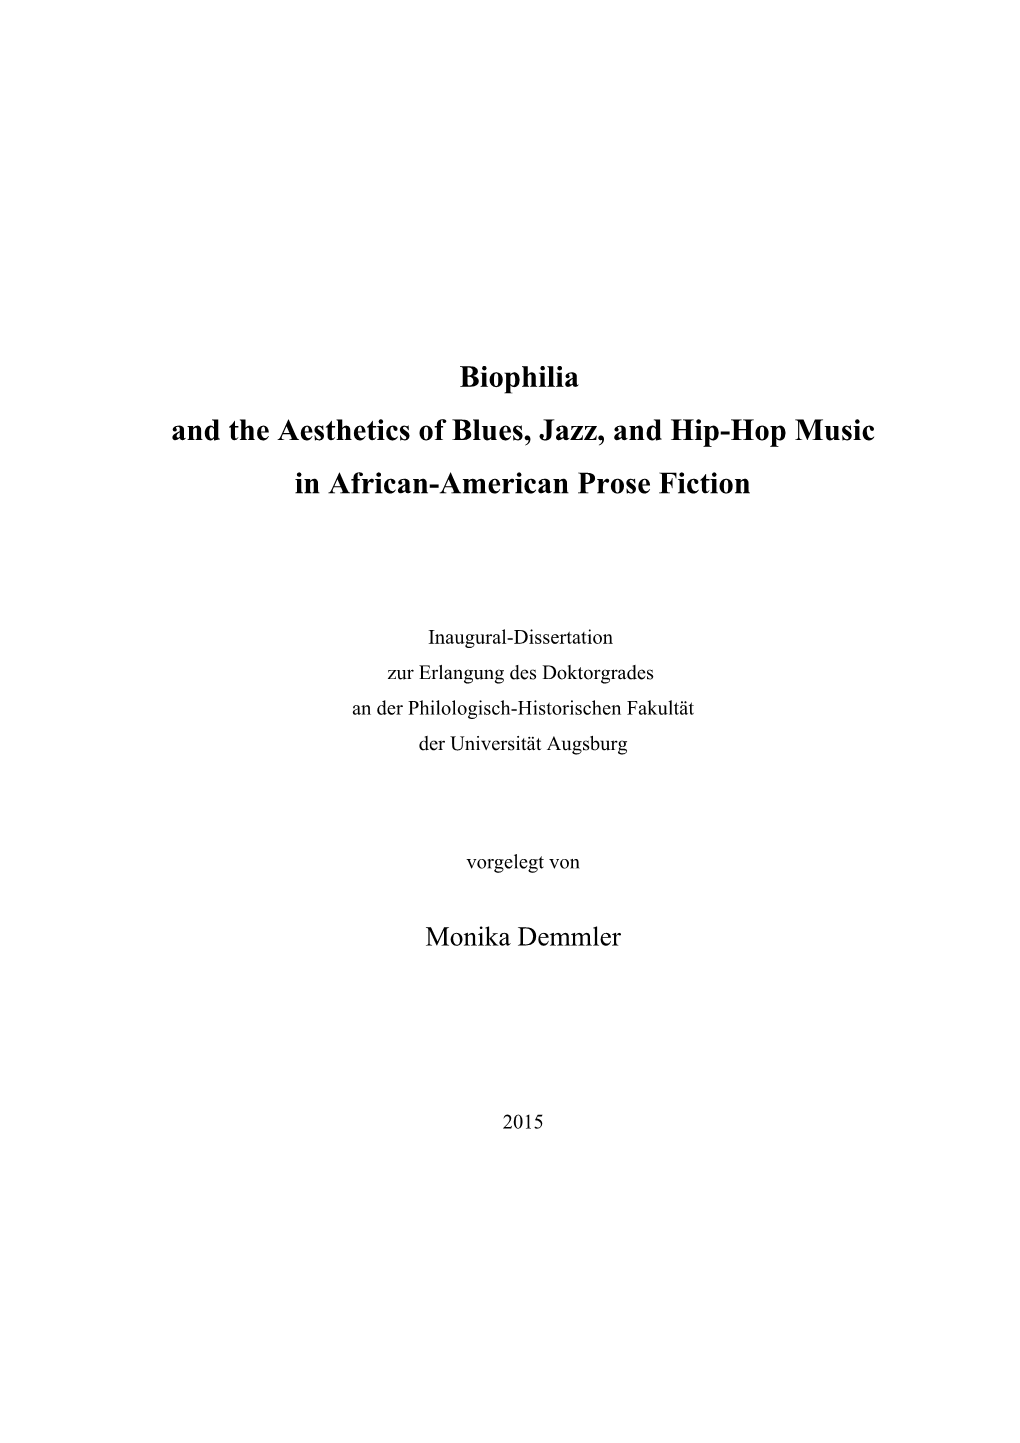 Biophilia and the Aesthetics of Blues, Jazz, and Hip-Hop Music in African-American Prose Fiction